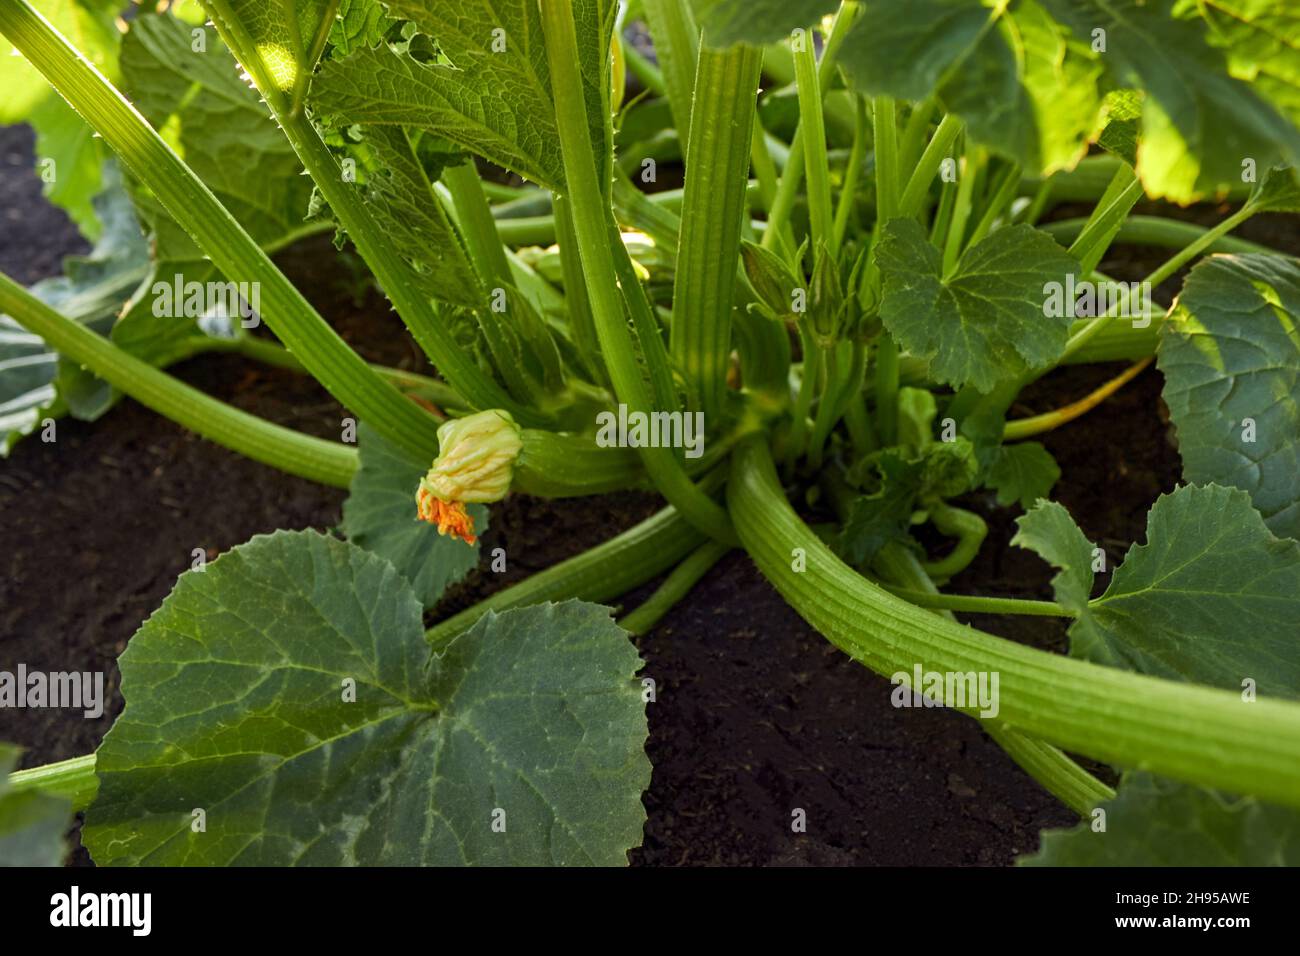 Zucchini plant. Zucchini with flower and fruit in farm. Green vegetable marrow growing on bush. Courgettes blossoms. Green stems of zucchini bushes. Stock Photo